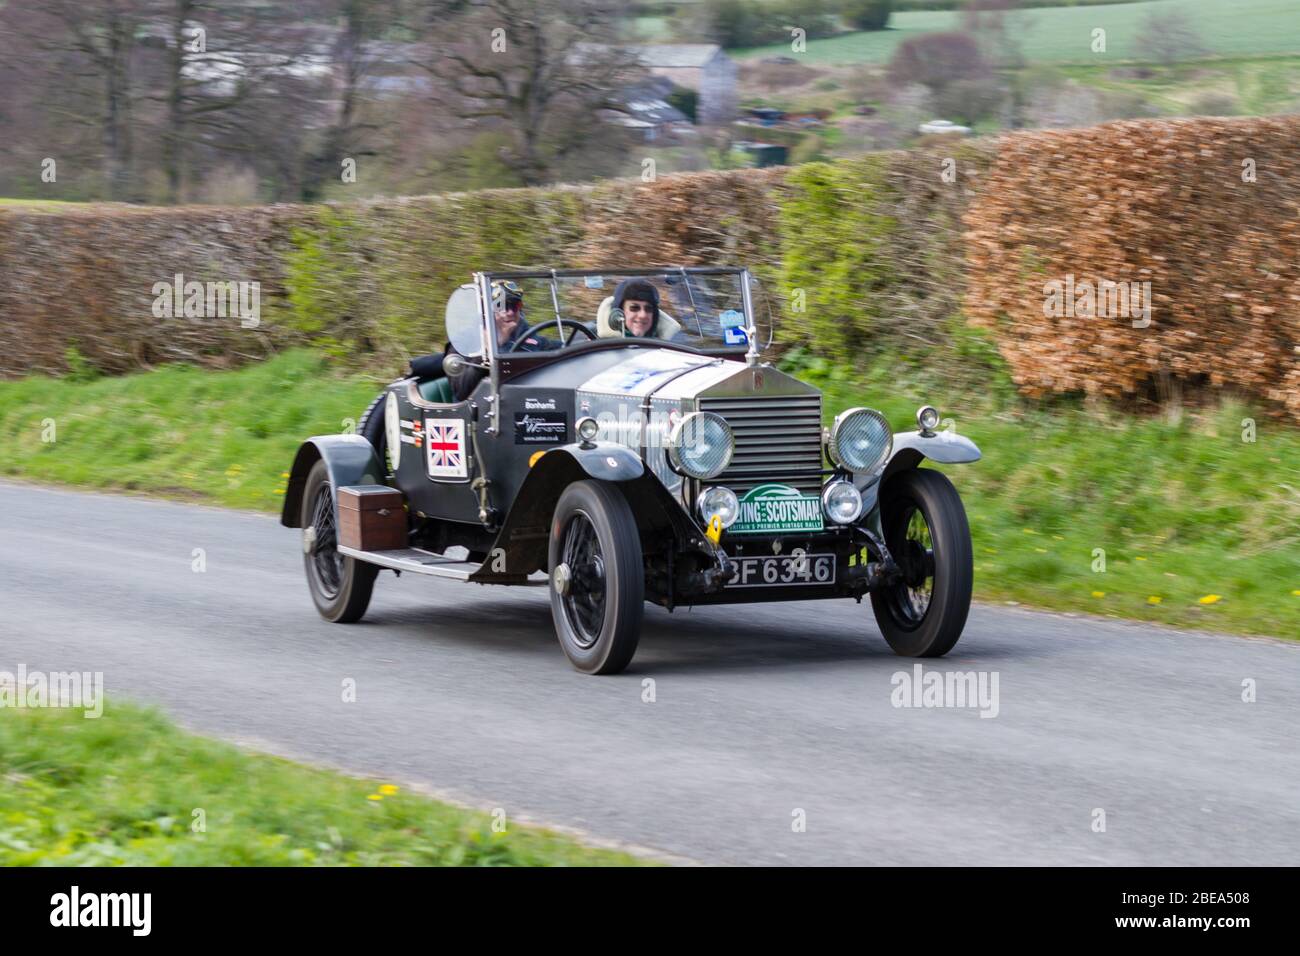 A Rolls Royce Boat Tailored Roadster climbs Southwaite Hill in Cumbria, northern England.  The car is taking part in the 11th Flying Scotsman Rally. Stock Photo